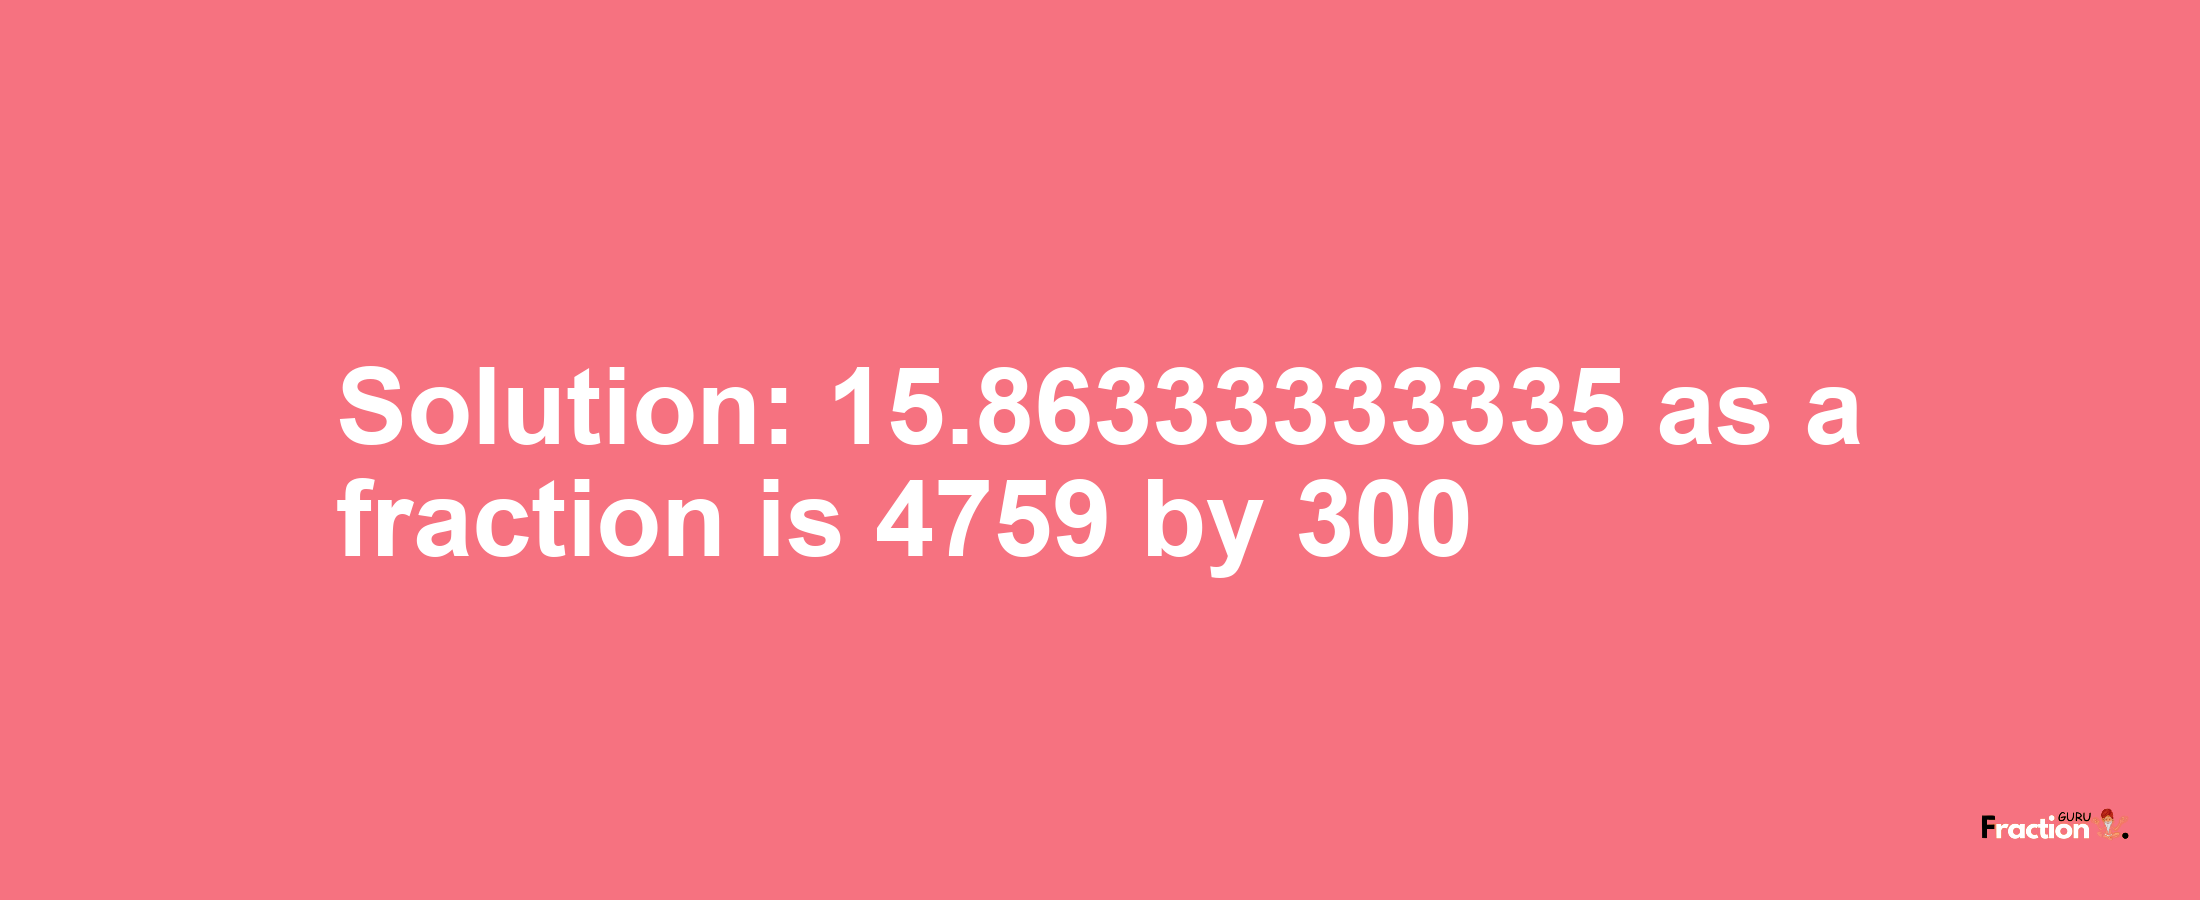 Solution:15.86333333335 as a fraction is 4759/300